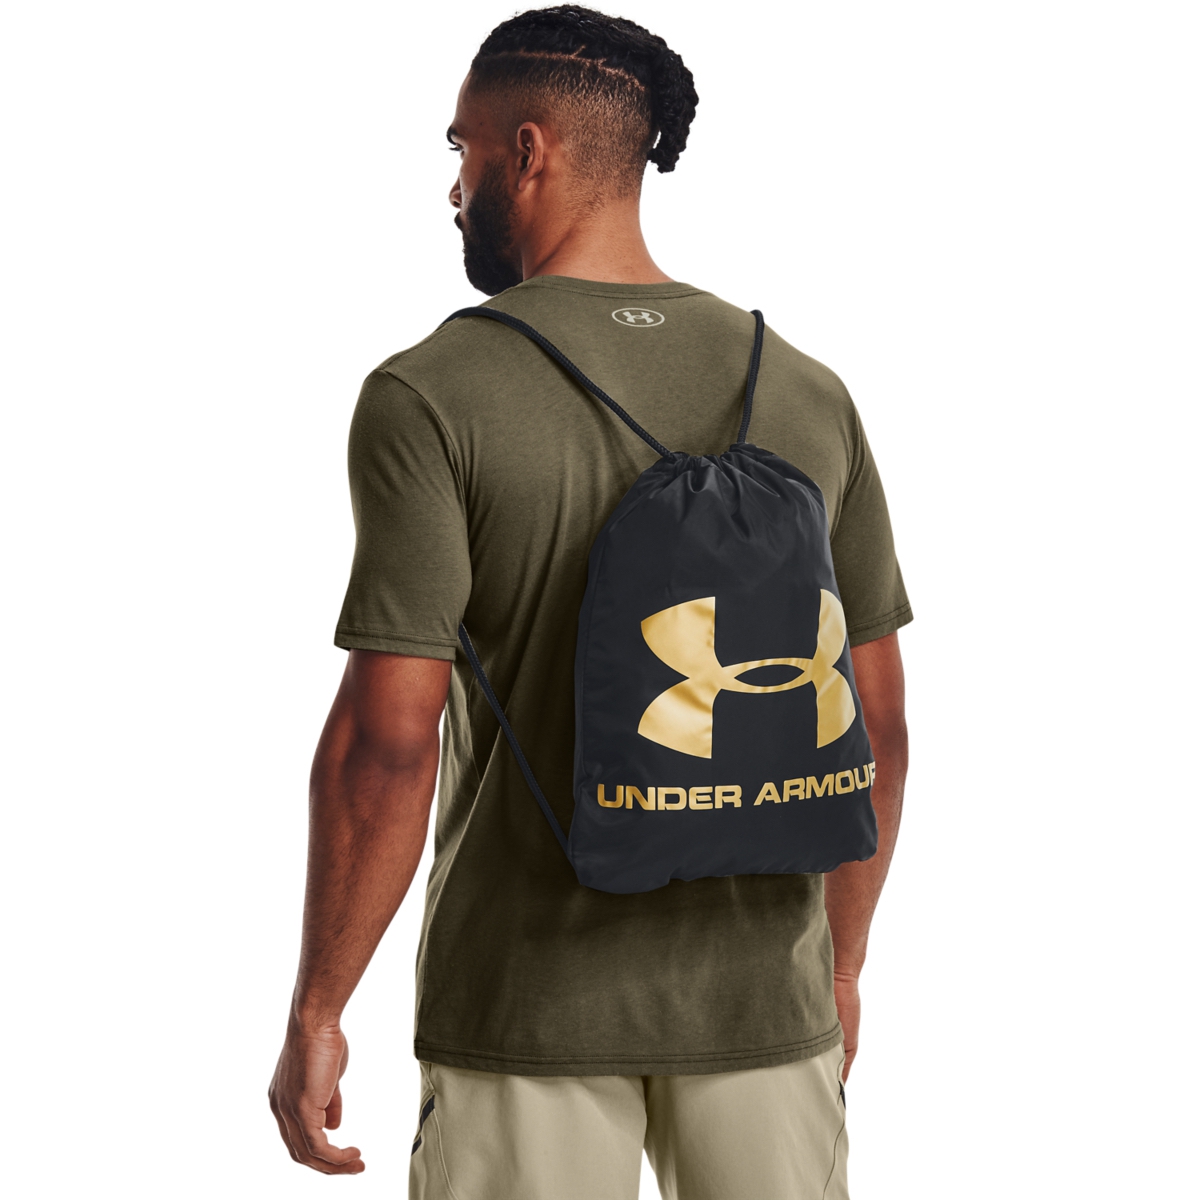 Rucsac Unisex OZSEE SACKPACK Under Armour